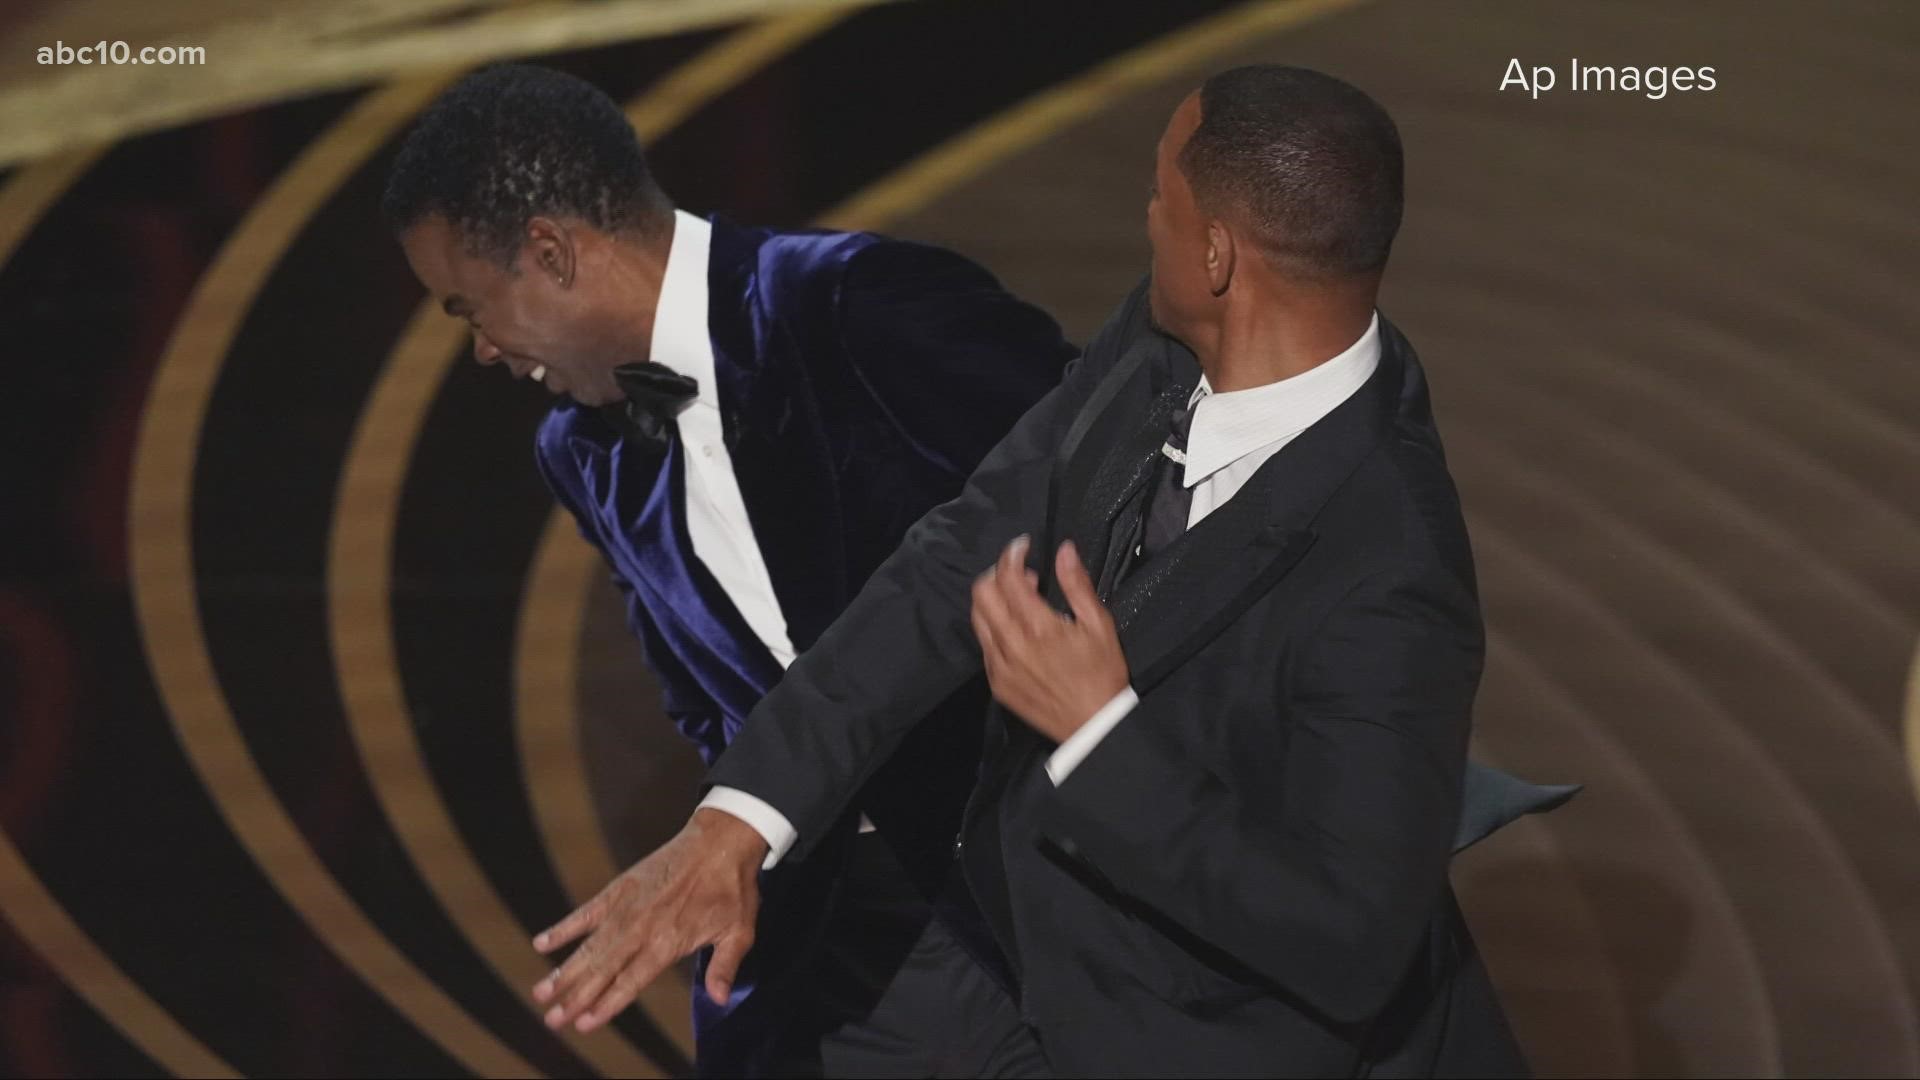 Will Smith's Oscars acceptance speech for best actor wavered between defense and apology for slapping Chris Rock on stage earlier in the show.